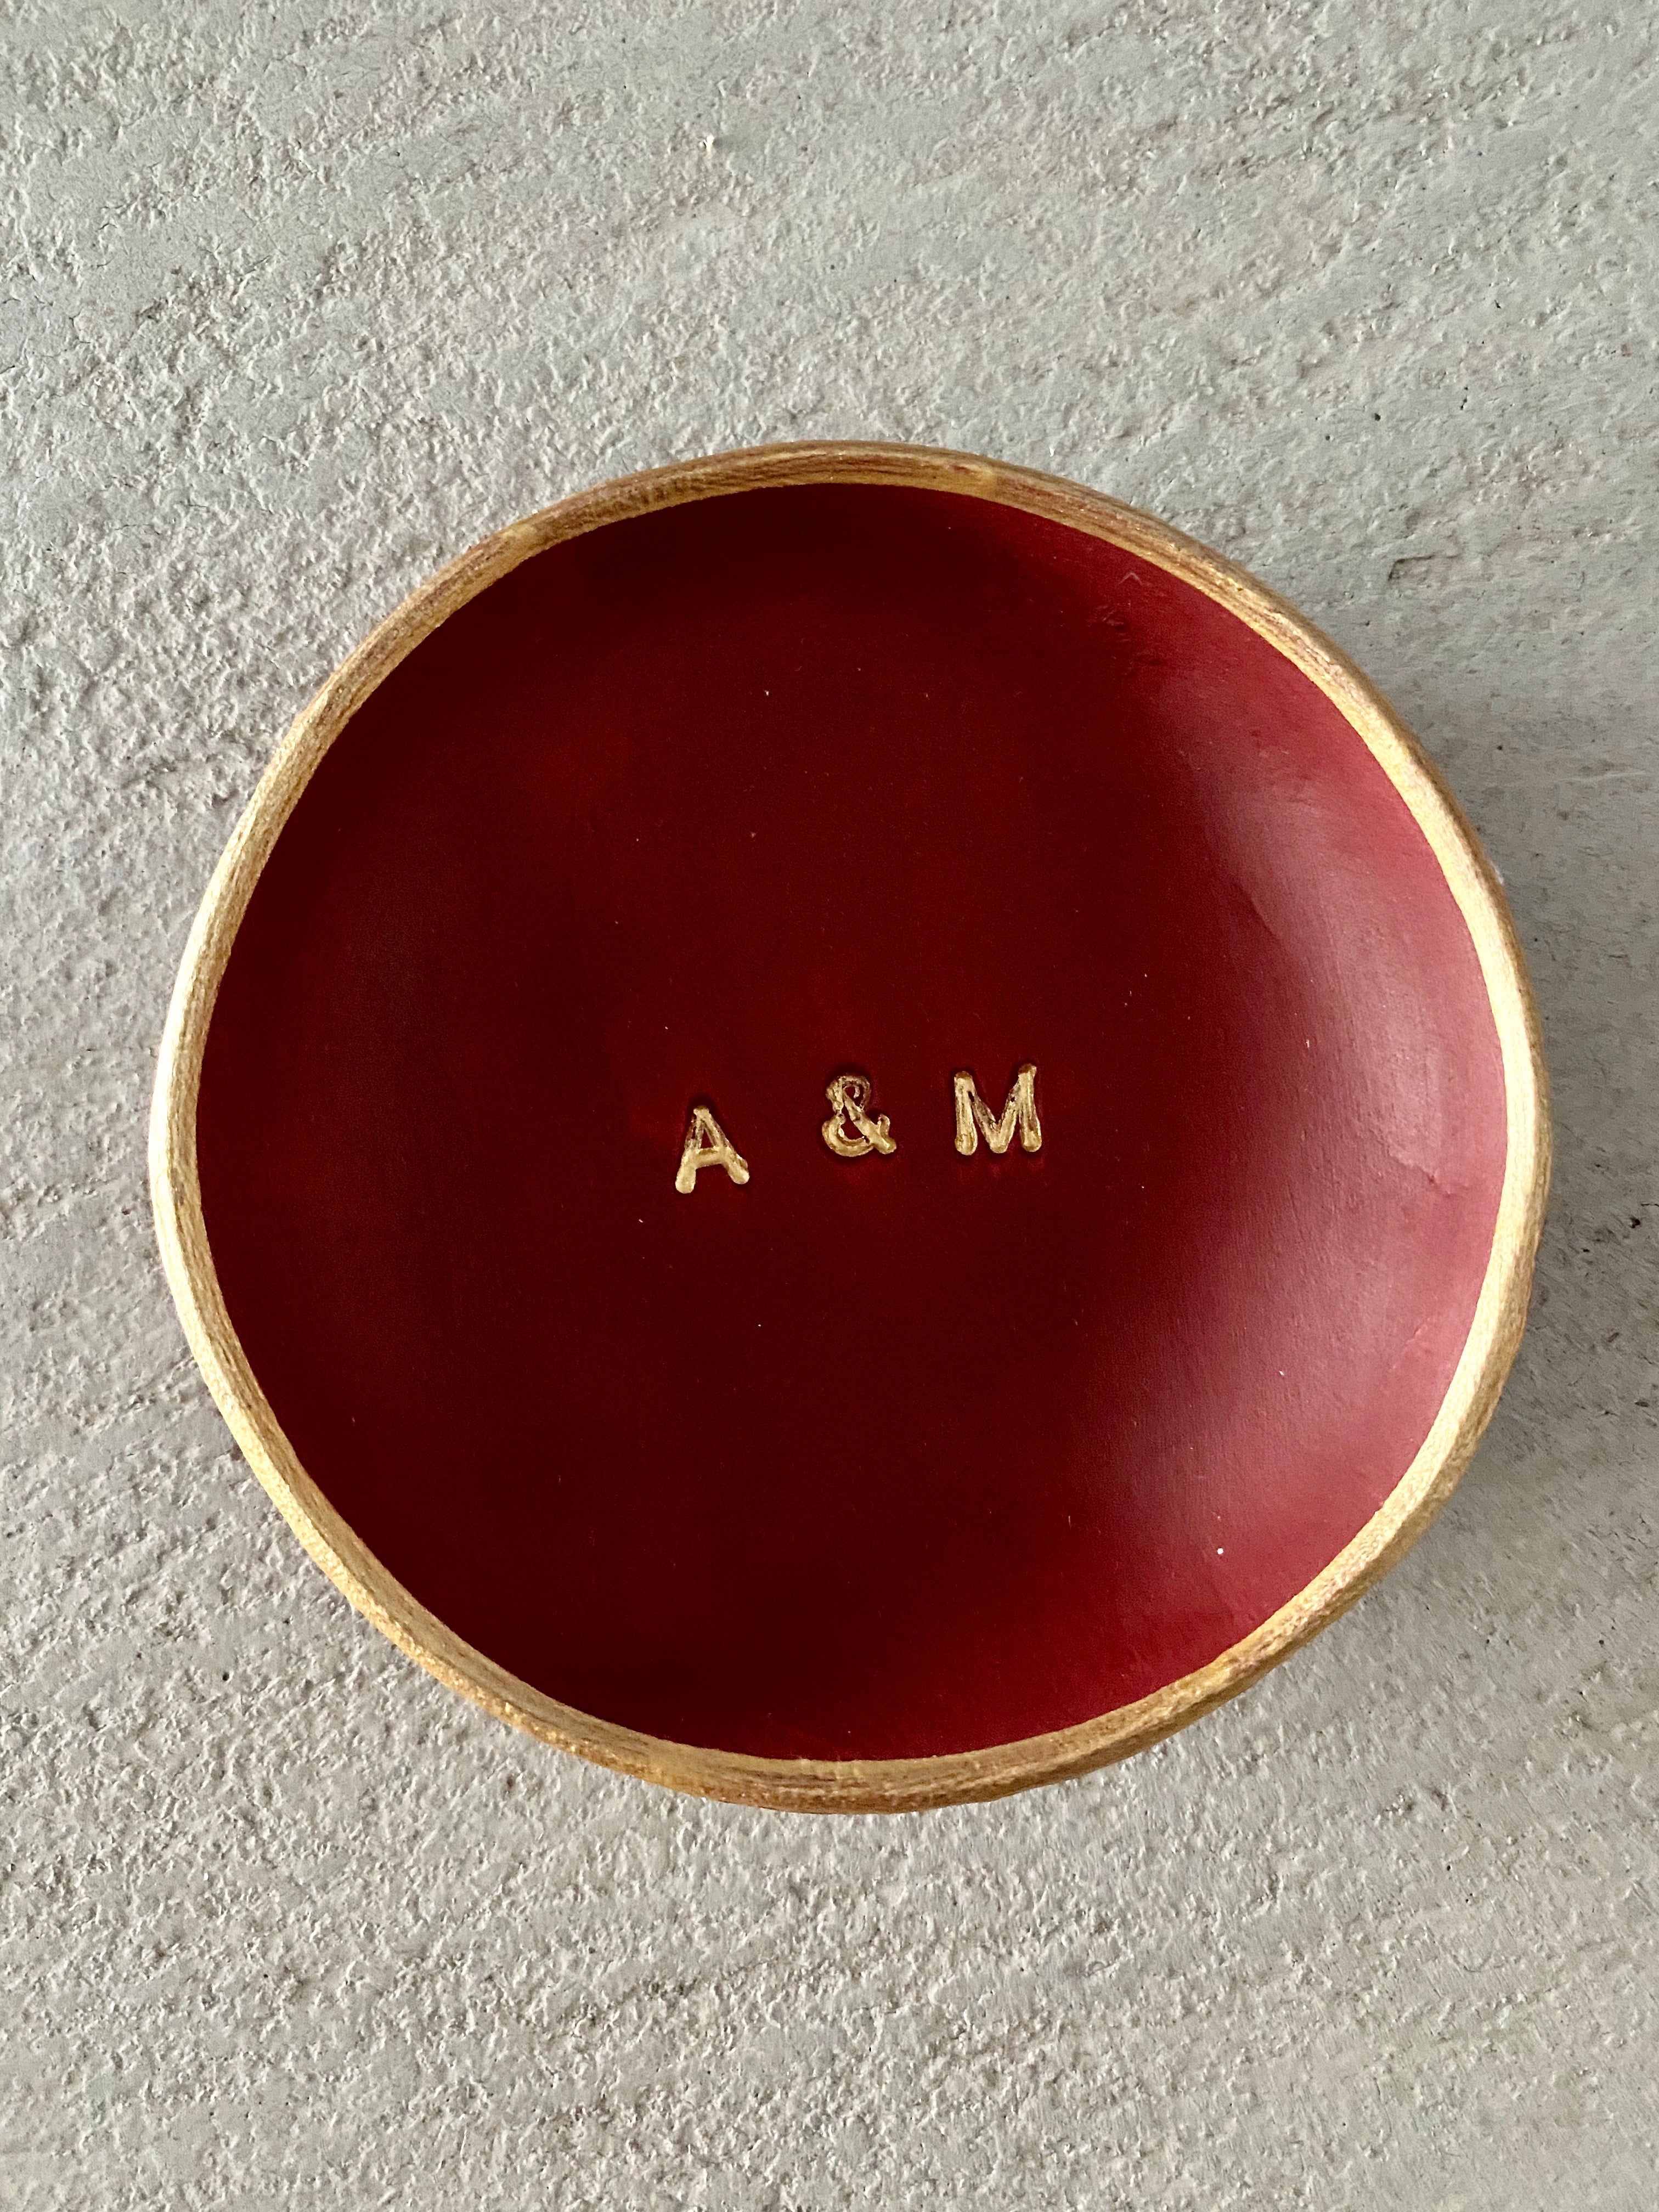 A & M Blessing Bowl